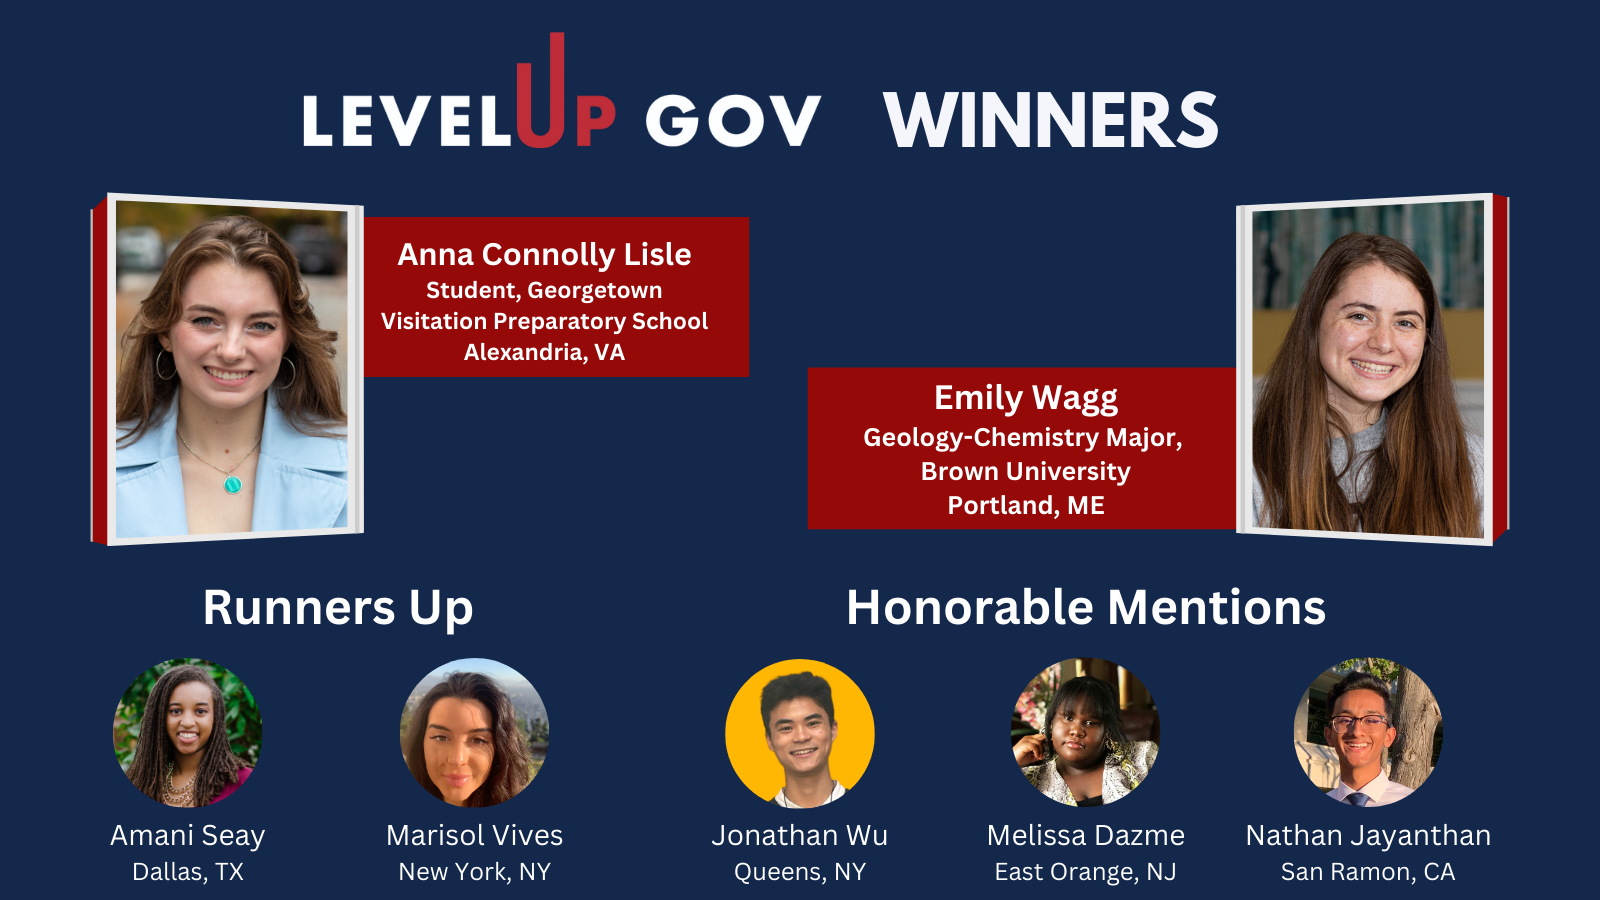 LevelUp Gov Winners, Runners Up, Honorable Mentions